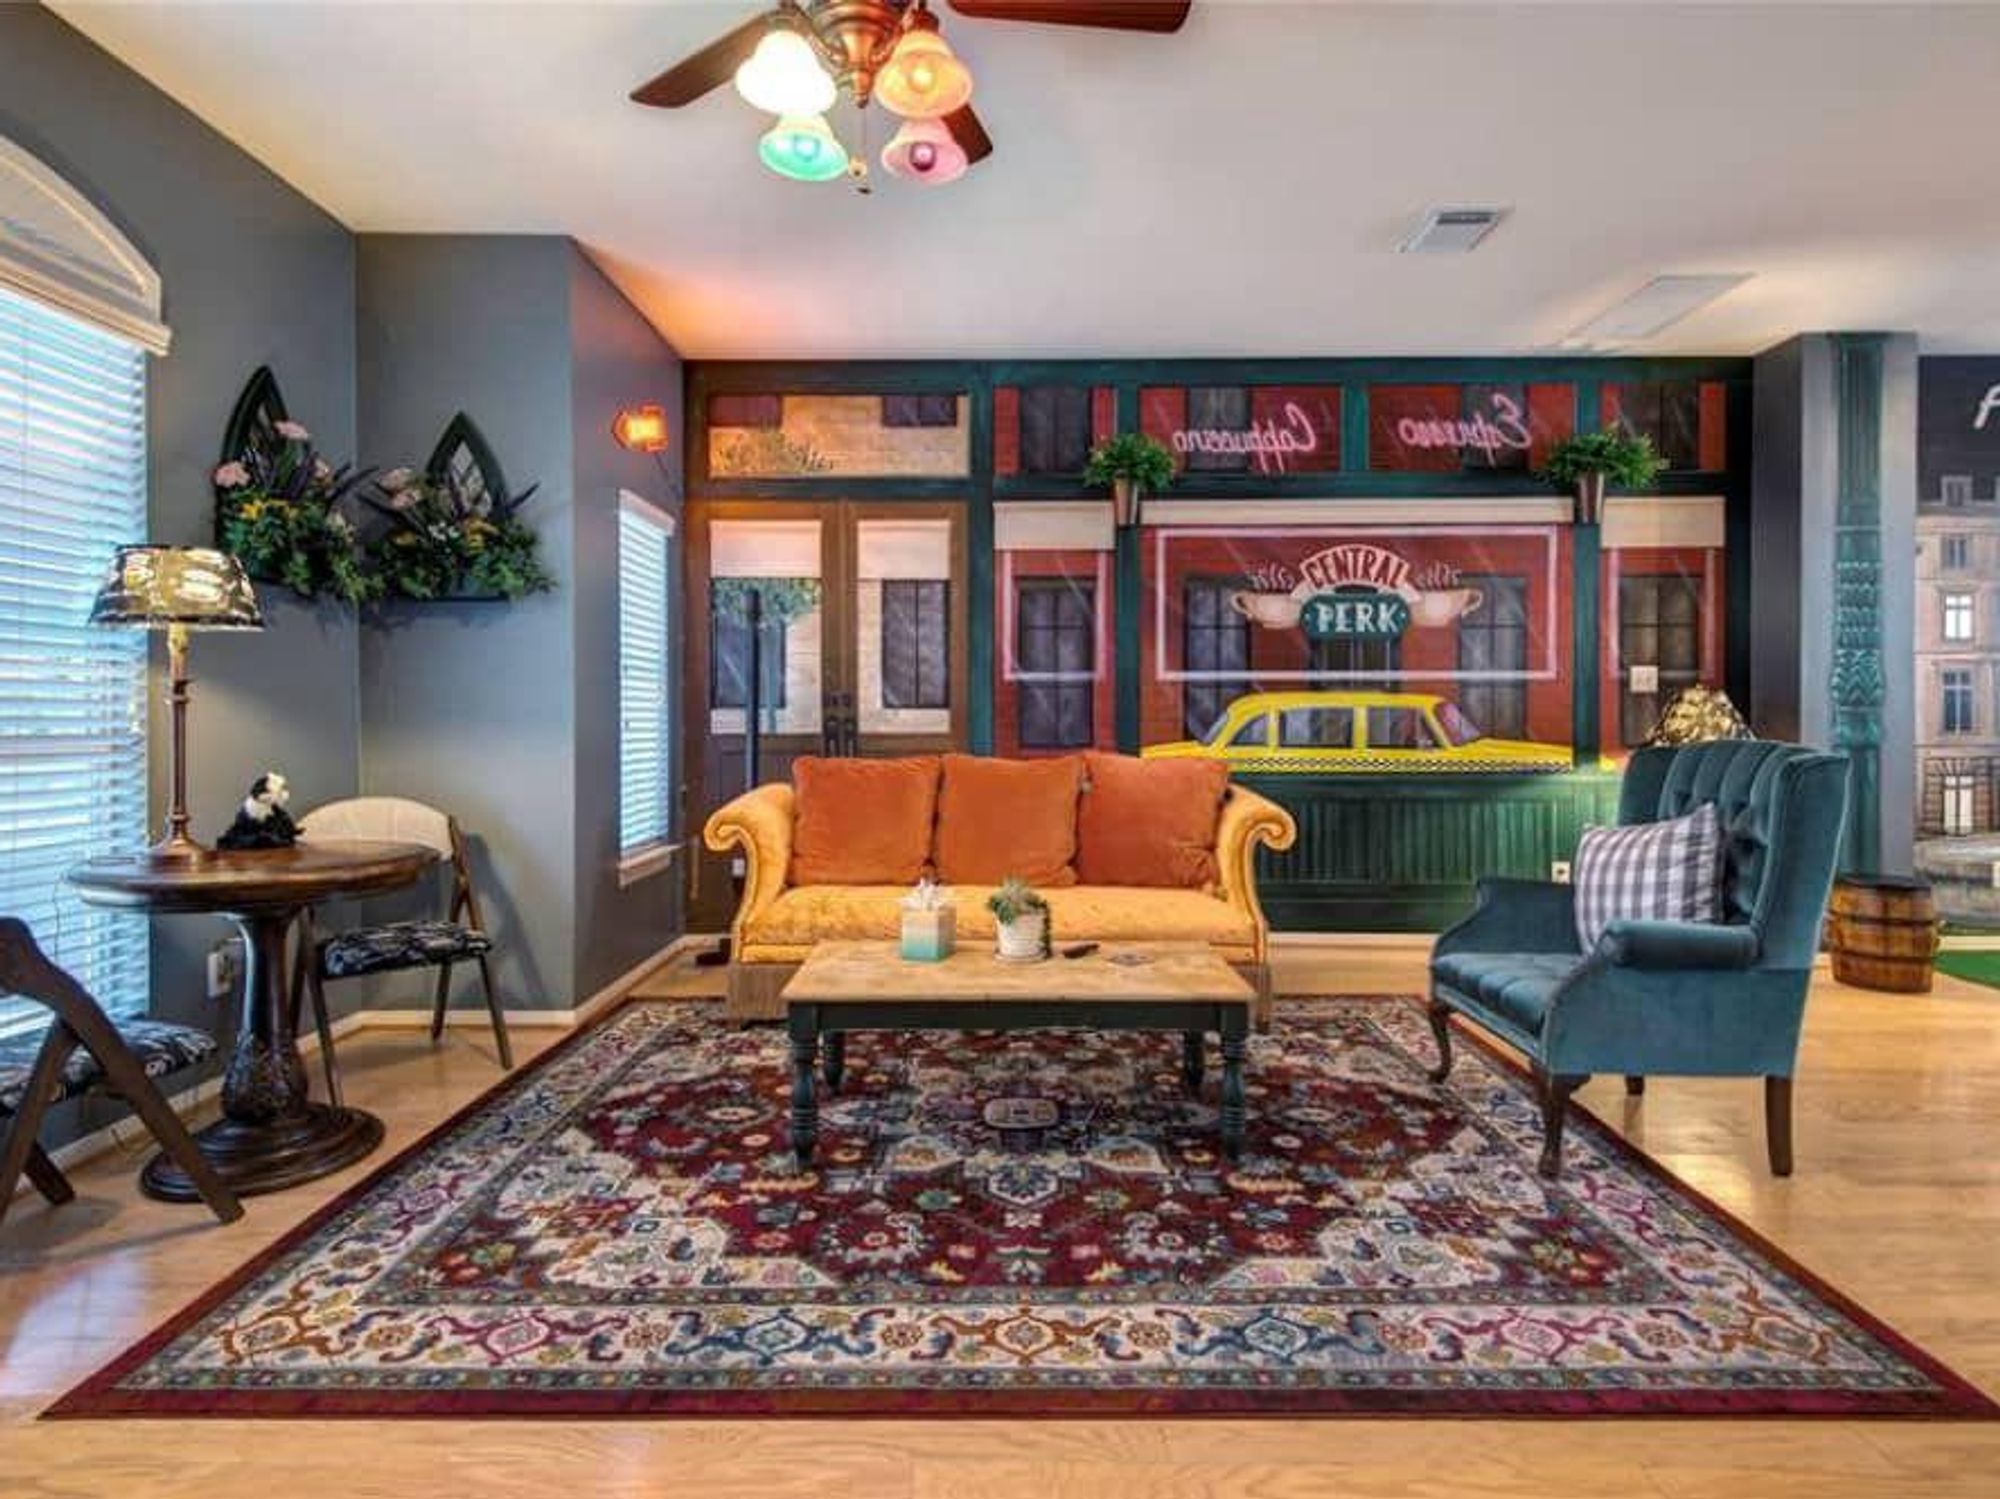 Sip lattes in this Central Perk-themed living room.